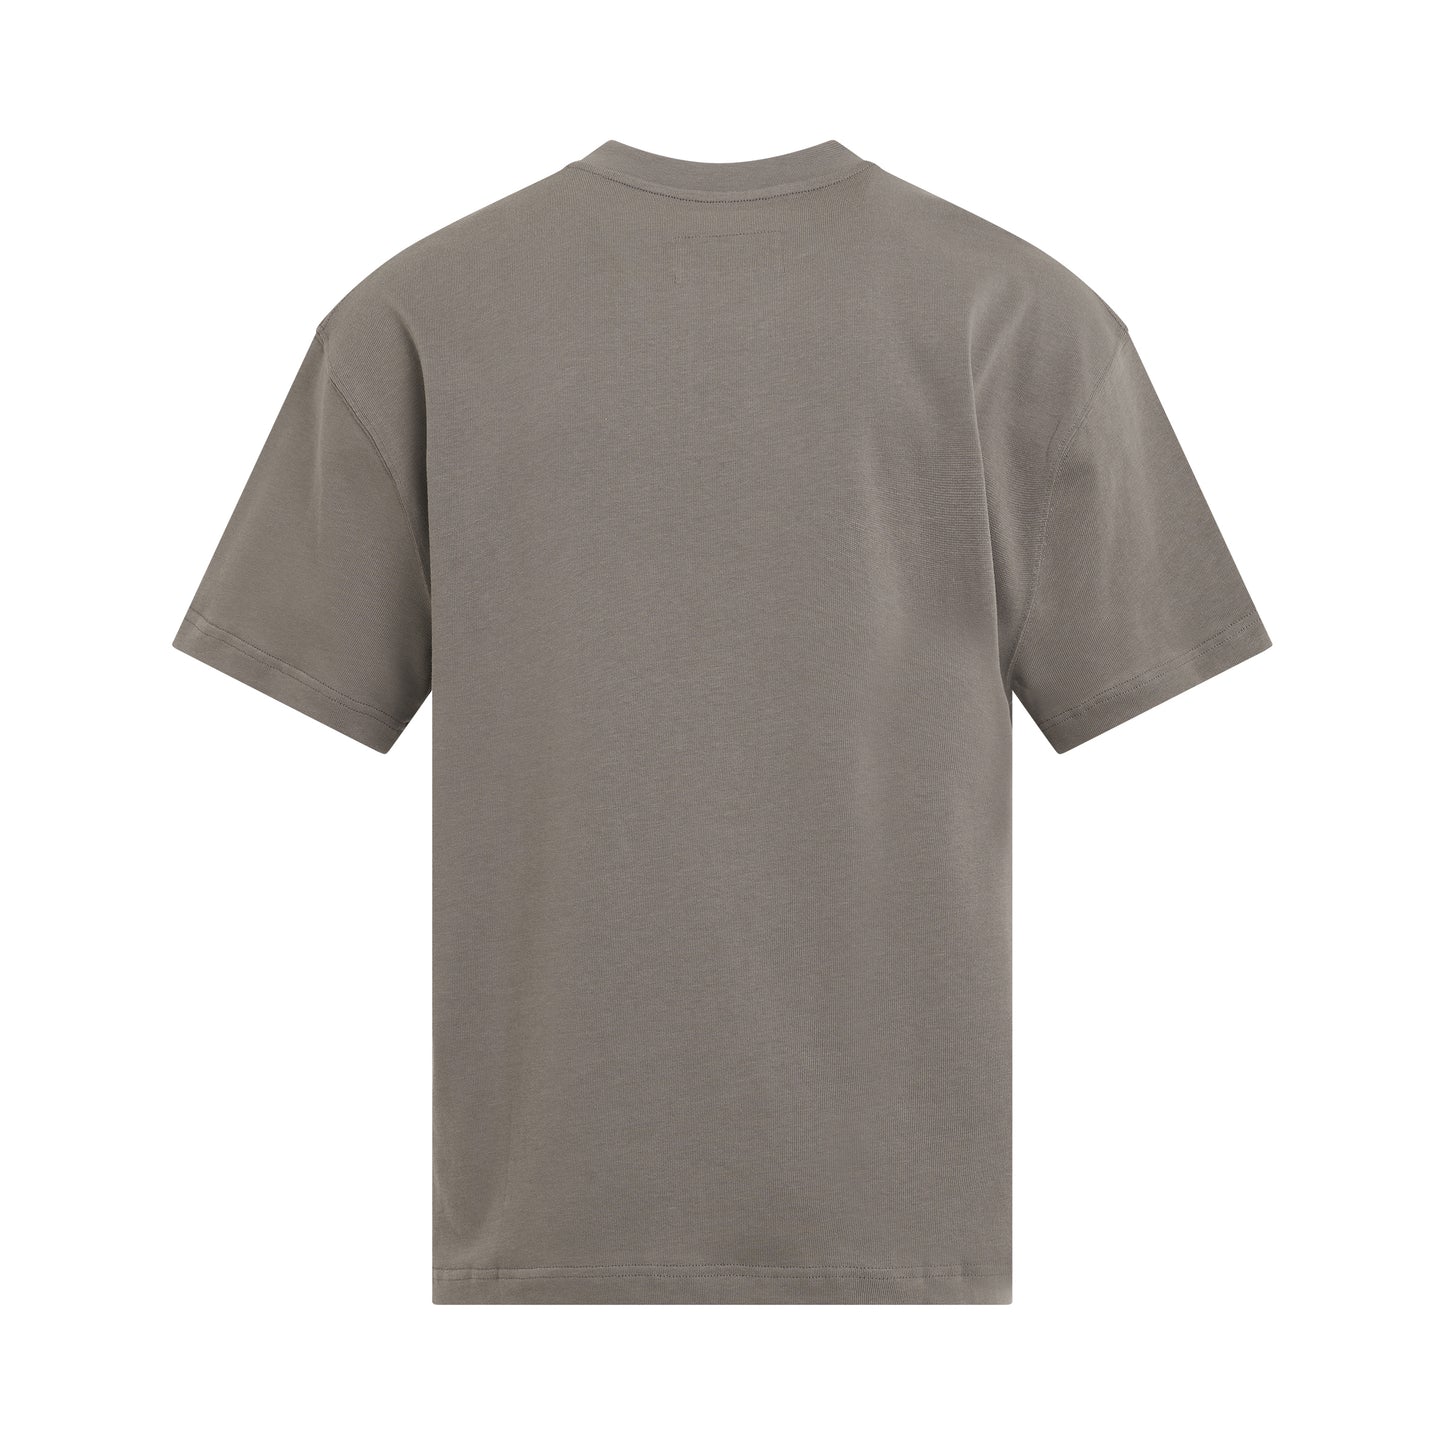 Essential T-Shirt in Mid Grey